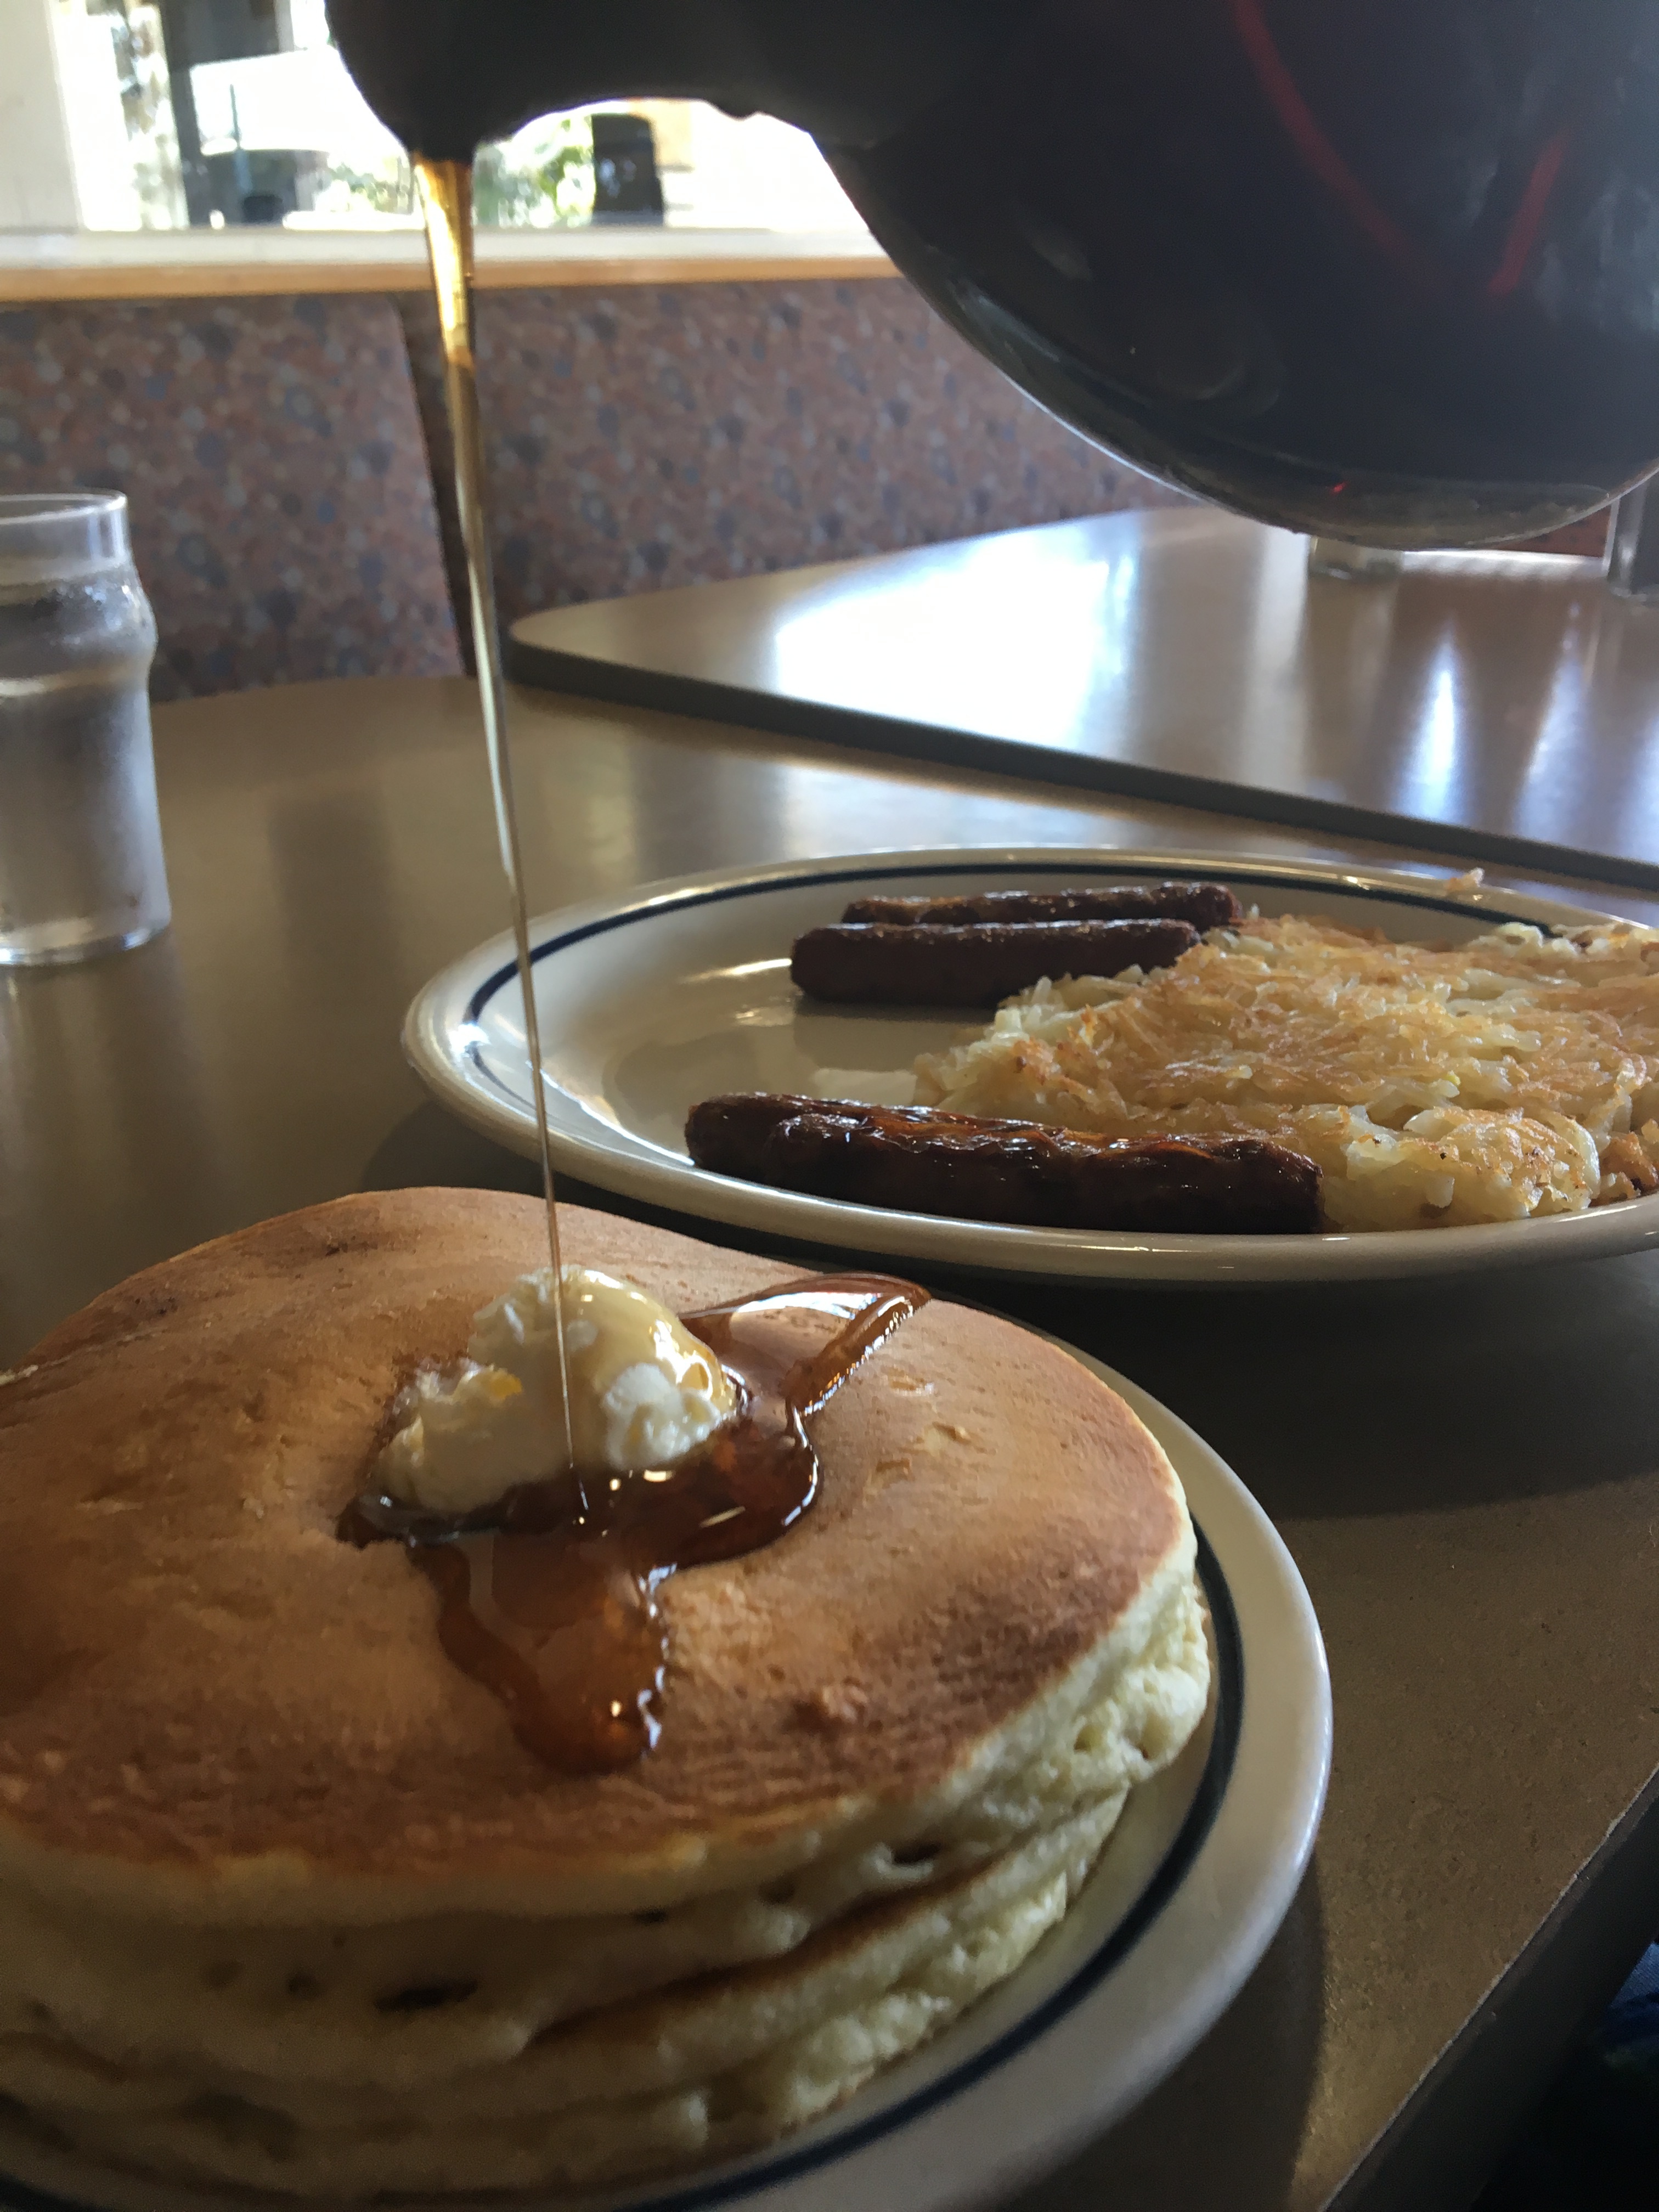 All You Can Eat Pancakes At IHOP – Fluffy Buttermilk Pancakes